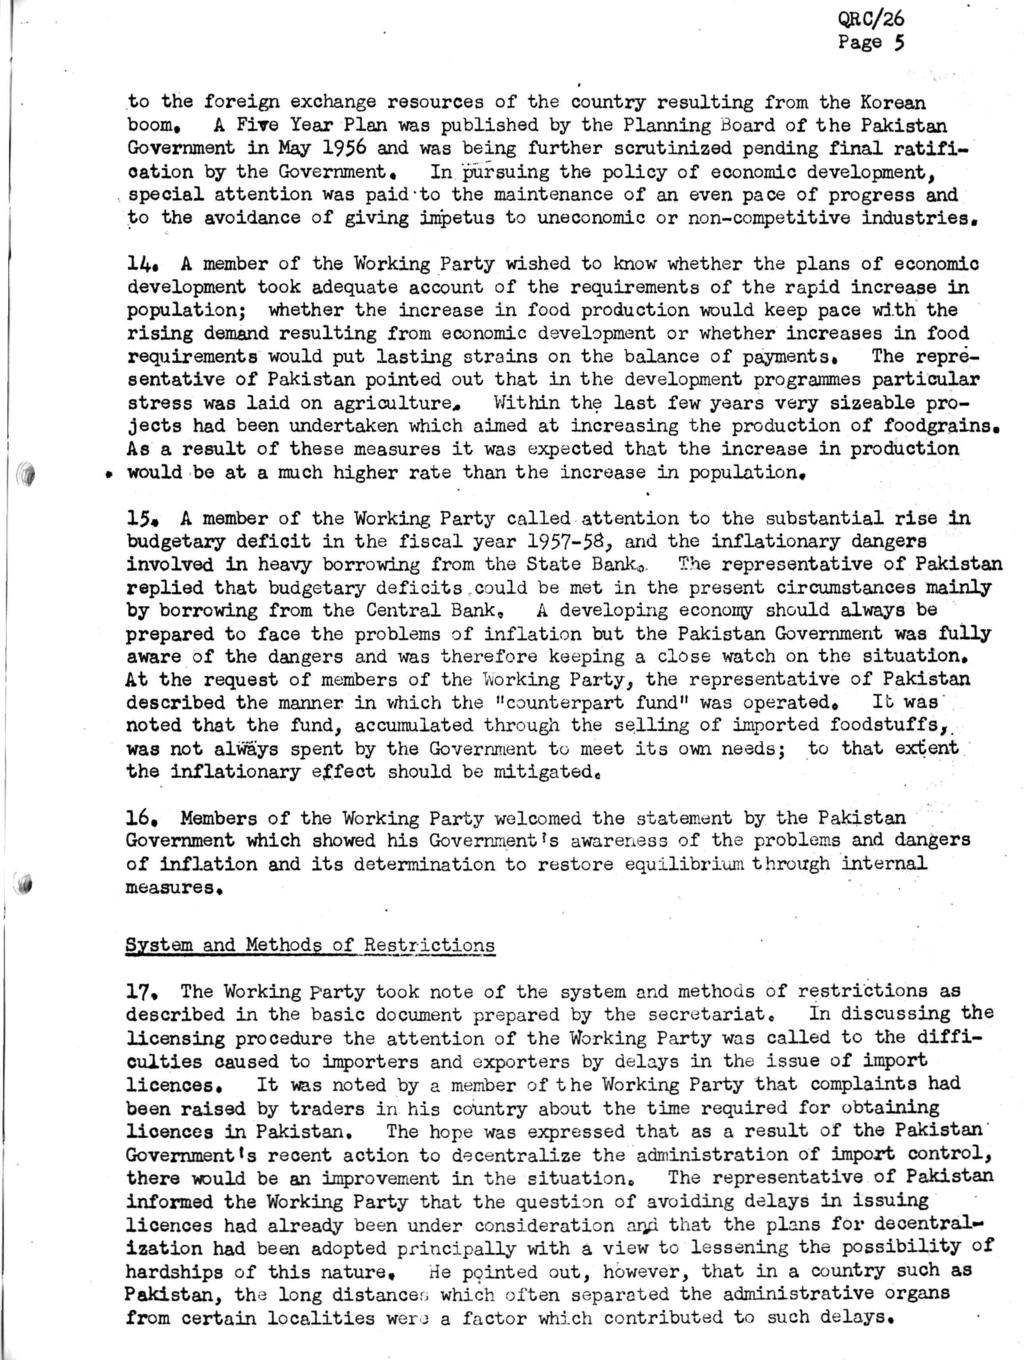 Page 5 to the foreign exchange resources of the country resulting from the Korean boom, A Five Year Plan was published by the Planning Board of the Pakistan Government in May 1956 and was being